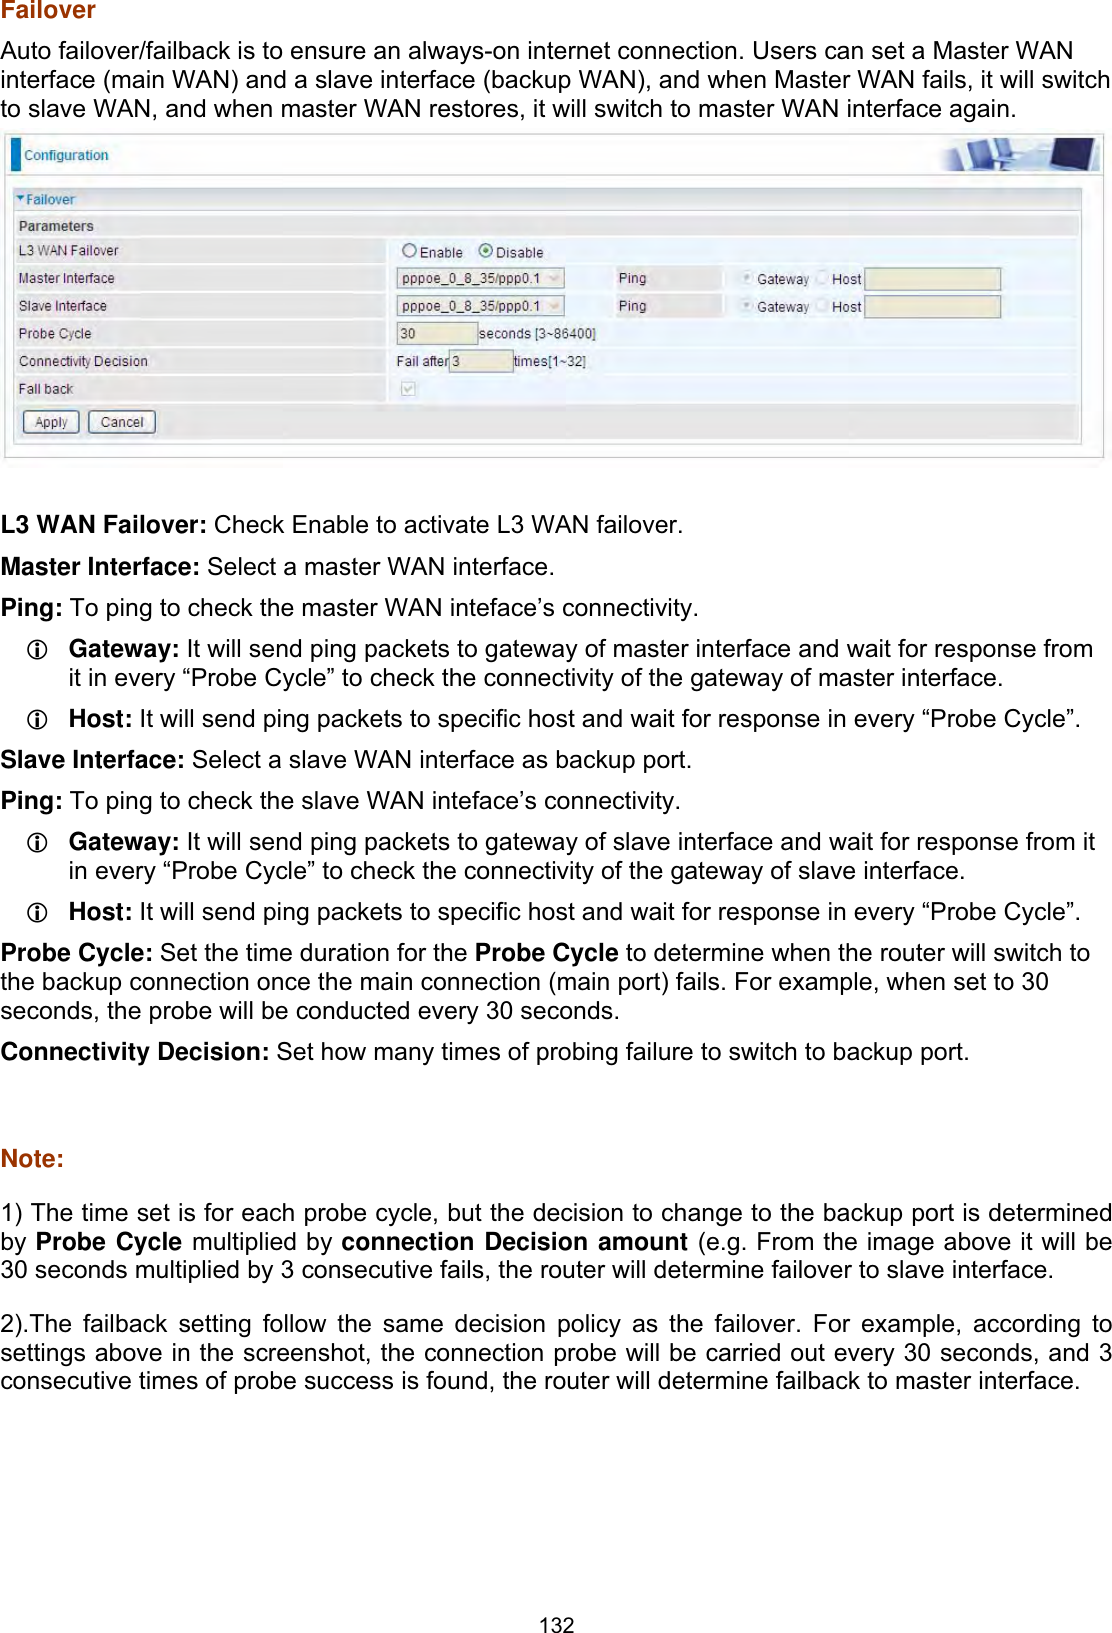 132FailoverAuto failover/failback is to ensure an always-on internet connection. Users can set a Master WAN interface (main WAN) and a slave interface (backup WAN), and when Master WAN fails, it will switch to slave WAN, and when master WAN restores, it will switch to master WAN interface again. L3 WAN Failover: Check Enable to activate L3 WAN failover. Master Interface: Select a master WAN interface.Ping: To ping to check the master WAN inteface’s connectivity. LGateway: It will send ping packets to gateway of master interface and wait for response from it in every “Probe Cycle” to check the connectivity of the gateway of master interface. LHost: It will send ping packets to specific host and wait for response in every “Probe Cycle”. Slave Interface: Select a slave WAN interface as backup port. Ping: To ping to check the slave WAN inteface’s connectivity. LGateway: It will send ping packets to gateway of slave interface and wait for response from it in every “Probe Cycle” to check the connectivity of the gateway of slave interface. LHost: It will send ping packets to specific host and wait for response in every “Probe Cycle”. Probe Cycle: Set the time duration for the Probe Cycle to determine when the router will switch to the backup connection once the main connection (main port) fails. For example, when set to 30 seconds, the probe will be conducted every 30 seconds. Connectivity Decision: Set how many times of probing failure to switch to backup port. Note:1) The time set is for each probe cycle, but the decision to change to the backup port is determined by Probe Cycle multiplied by connection Decision amount (e.g. From the image above it will be 30 seconds multiplied by 3 consecutive fails, the router will determine failover to slave interface.2).The failback setting follow the same decision policy as the failover. For example, according to settings above in the screenshot, the connection probe will be carried out every 30 seconds, and 3 consecutive times of probe success is found, the router will determine failback to master interface. 